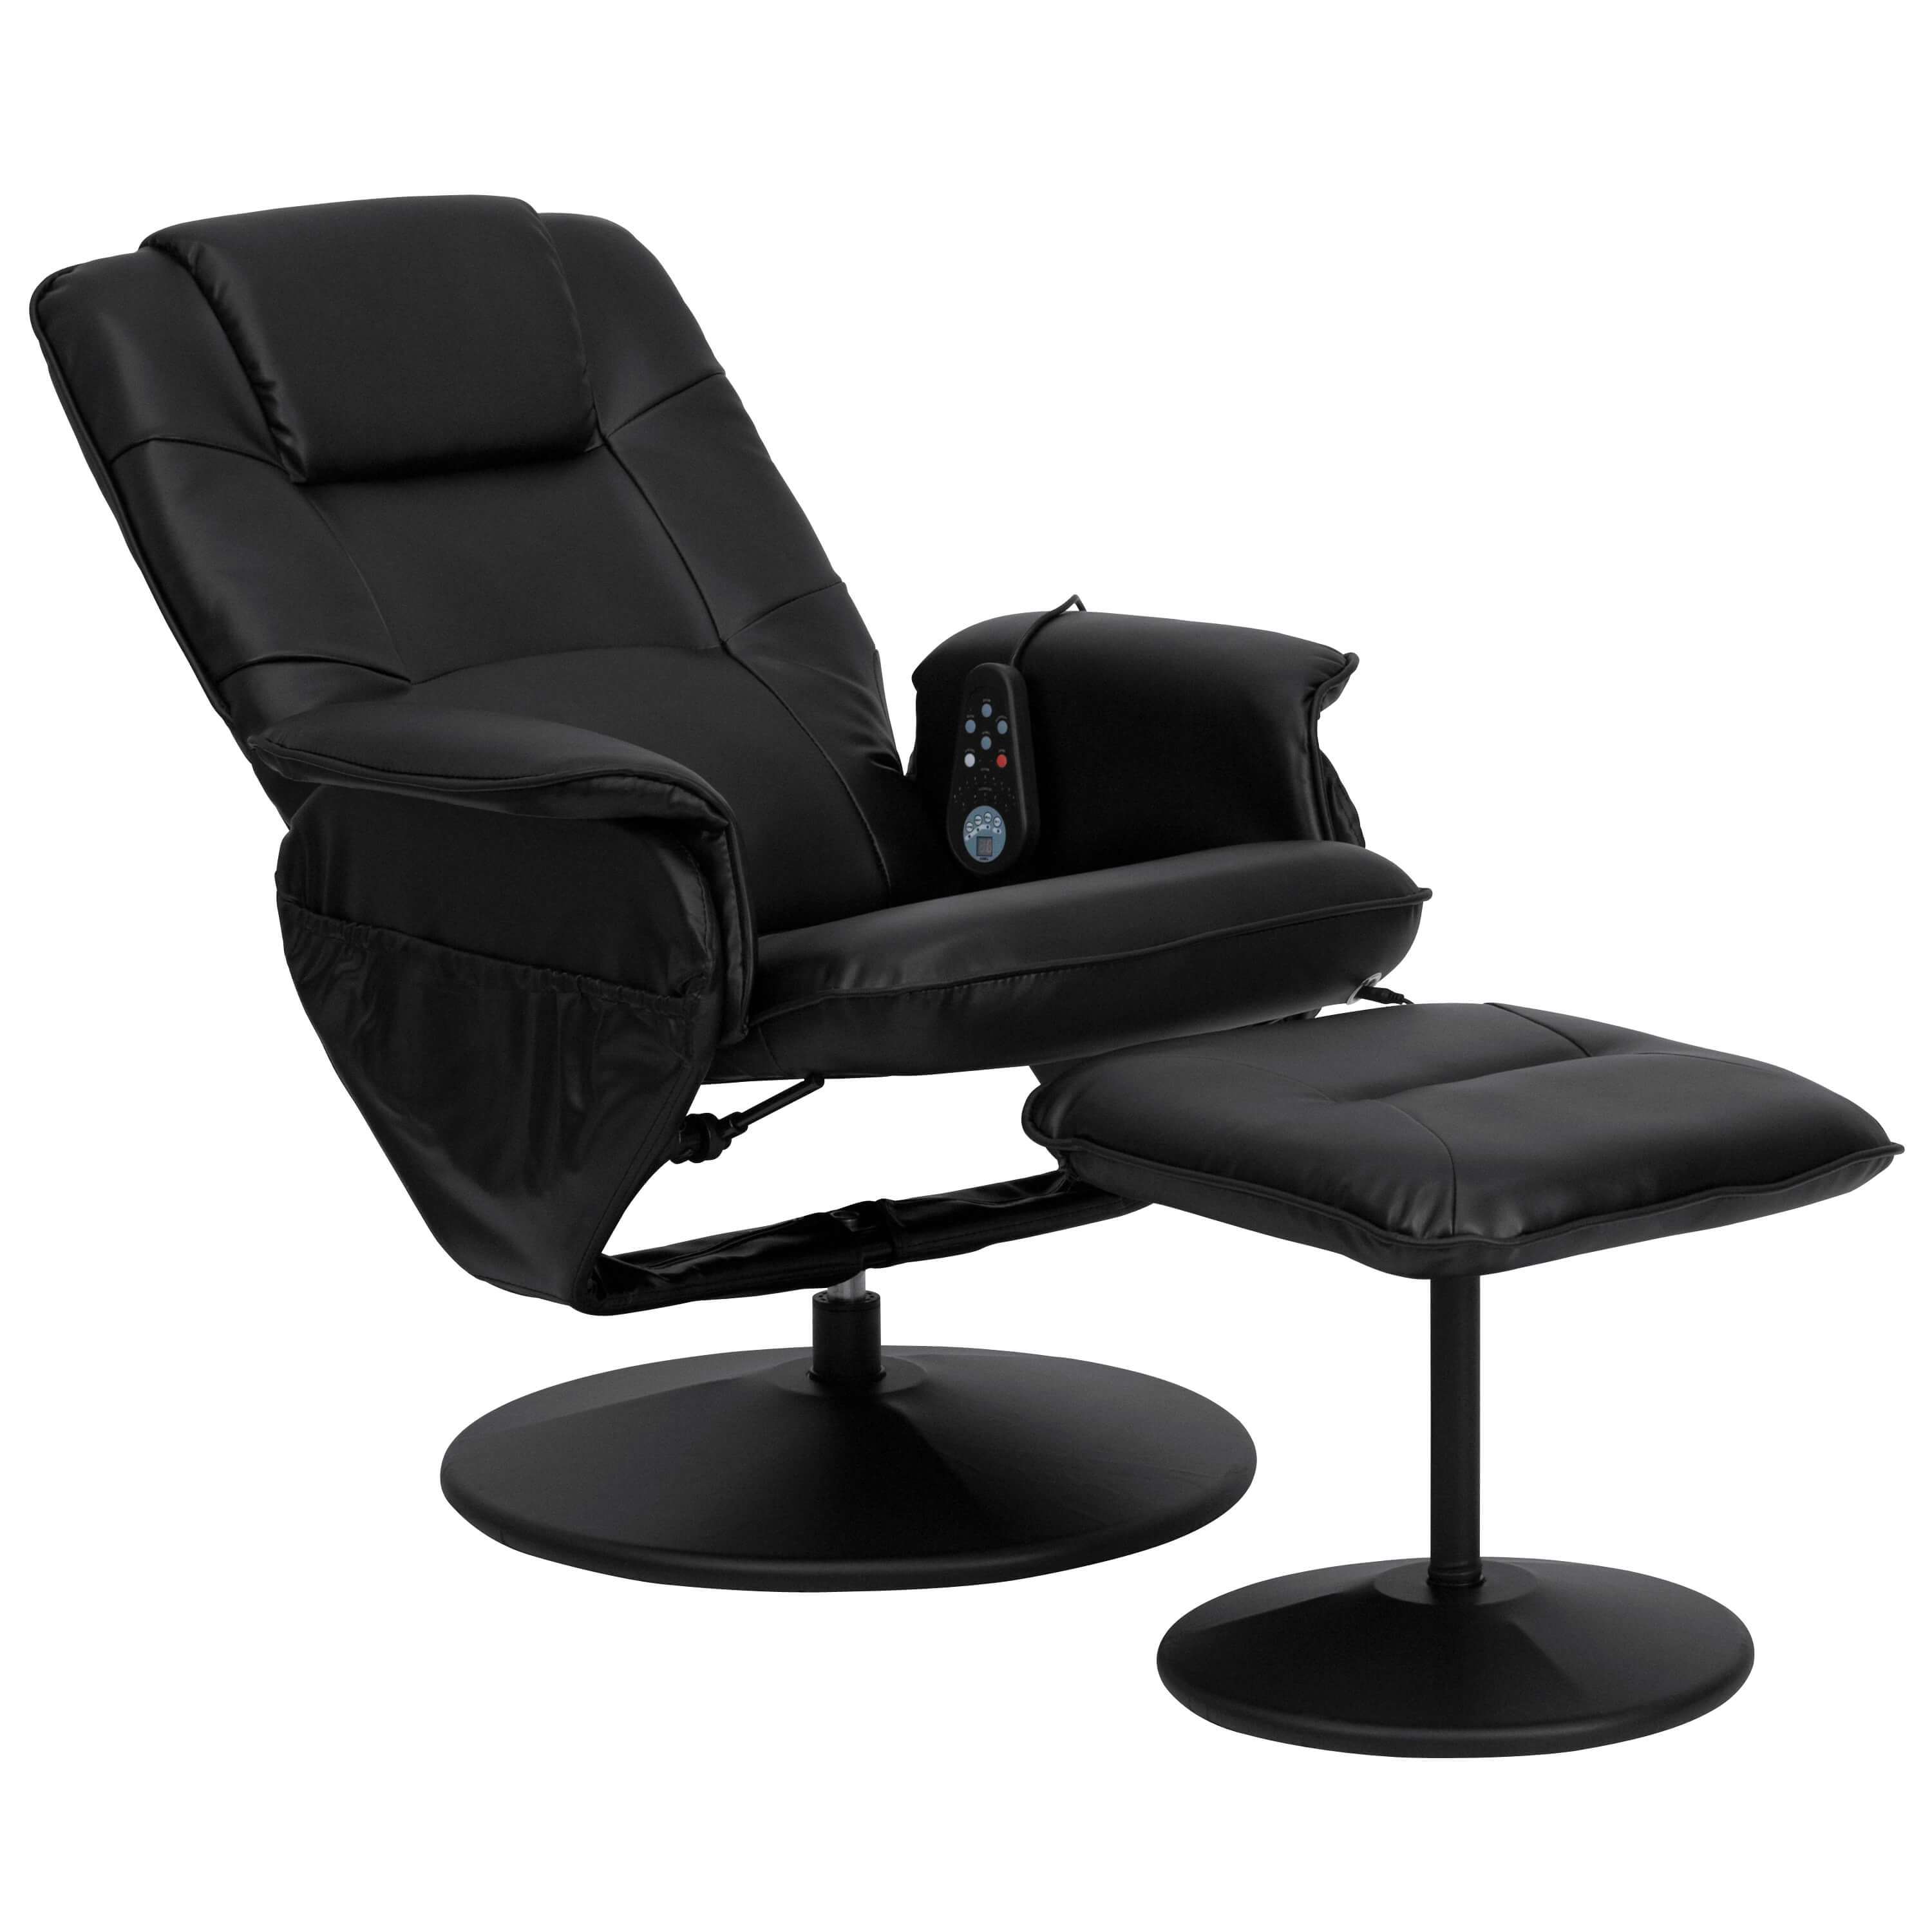 Recliner chair with massage reclined view